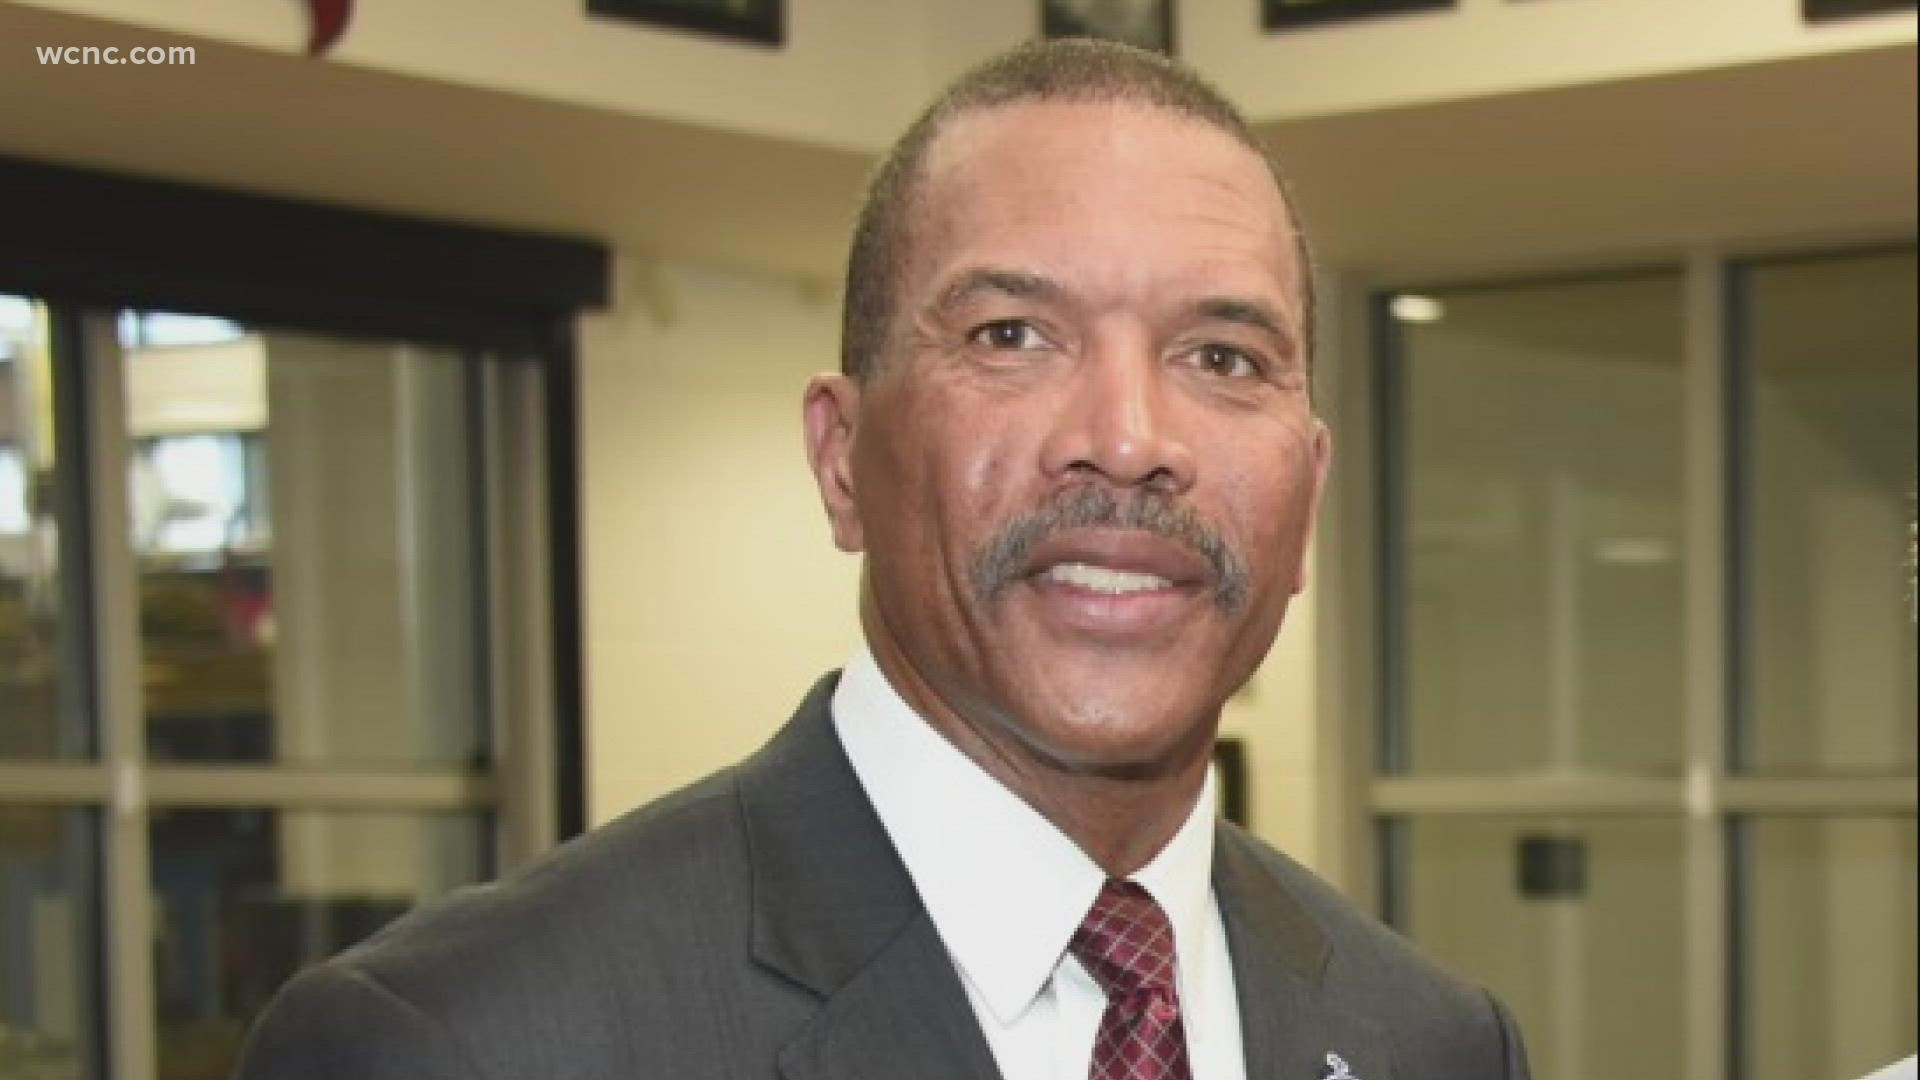 Chief Benjamin Barksdale submitted his resignation over an incident back in July. He's accused of punching both a man and his daughter while drunk in a restaurant.